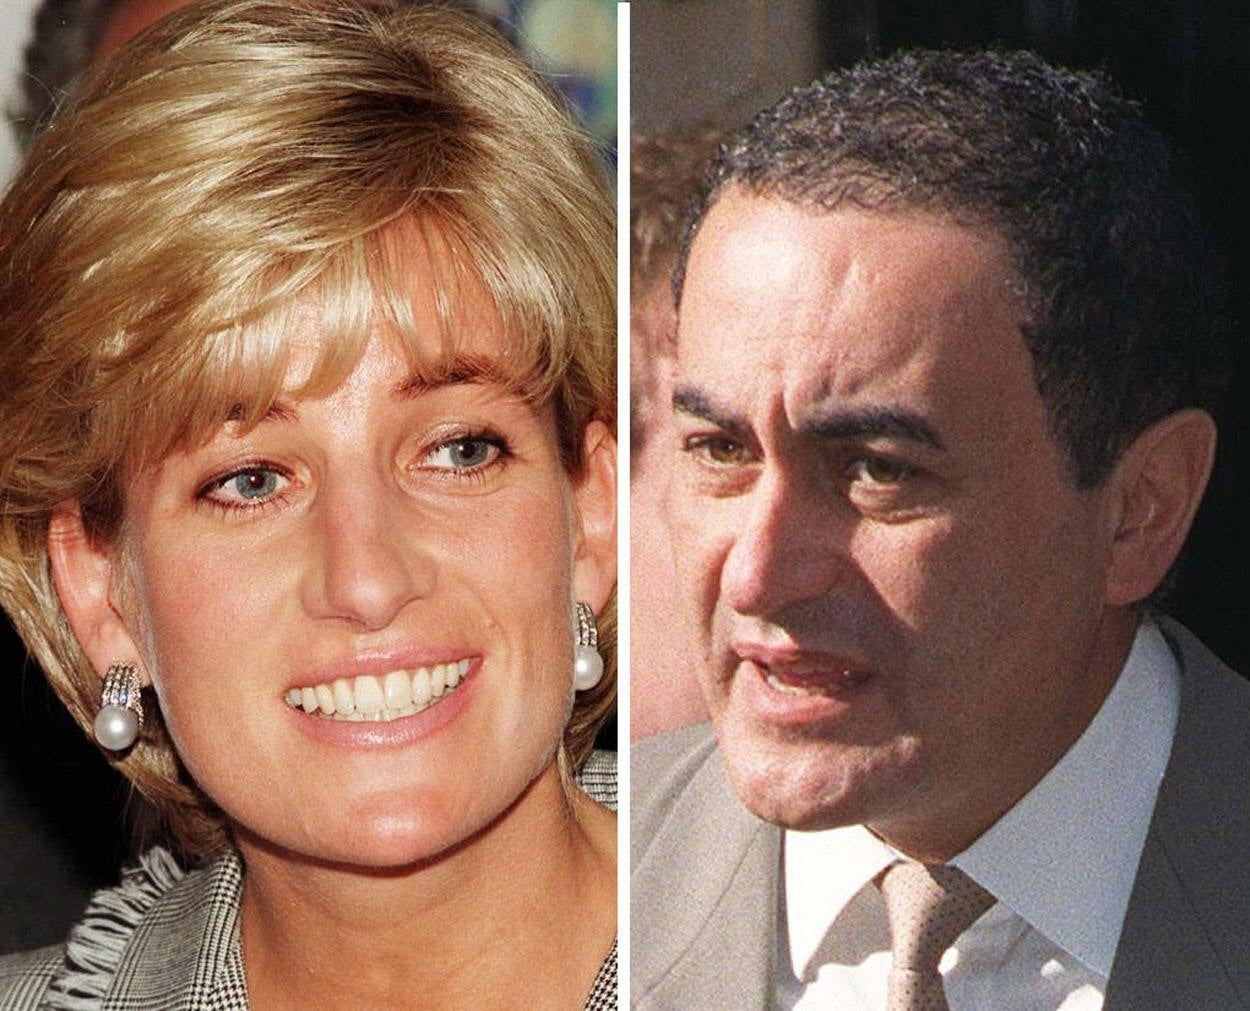 Mr Al Fayed was tortured by the death of his son Dodi alongside Princess Diana in a car crash in Paris